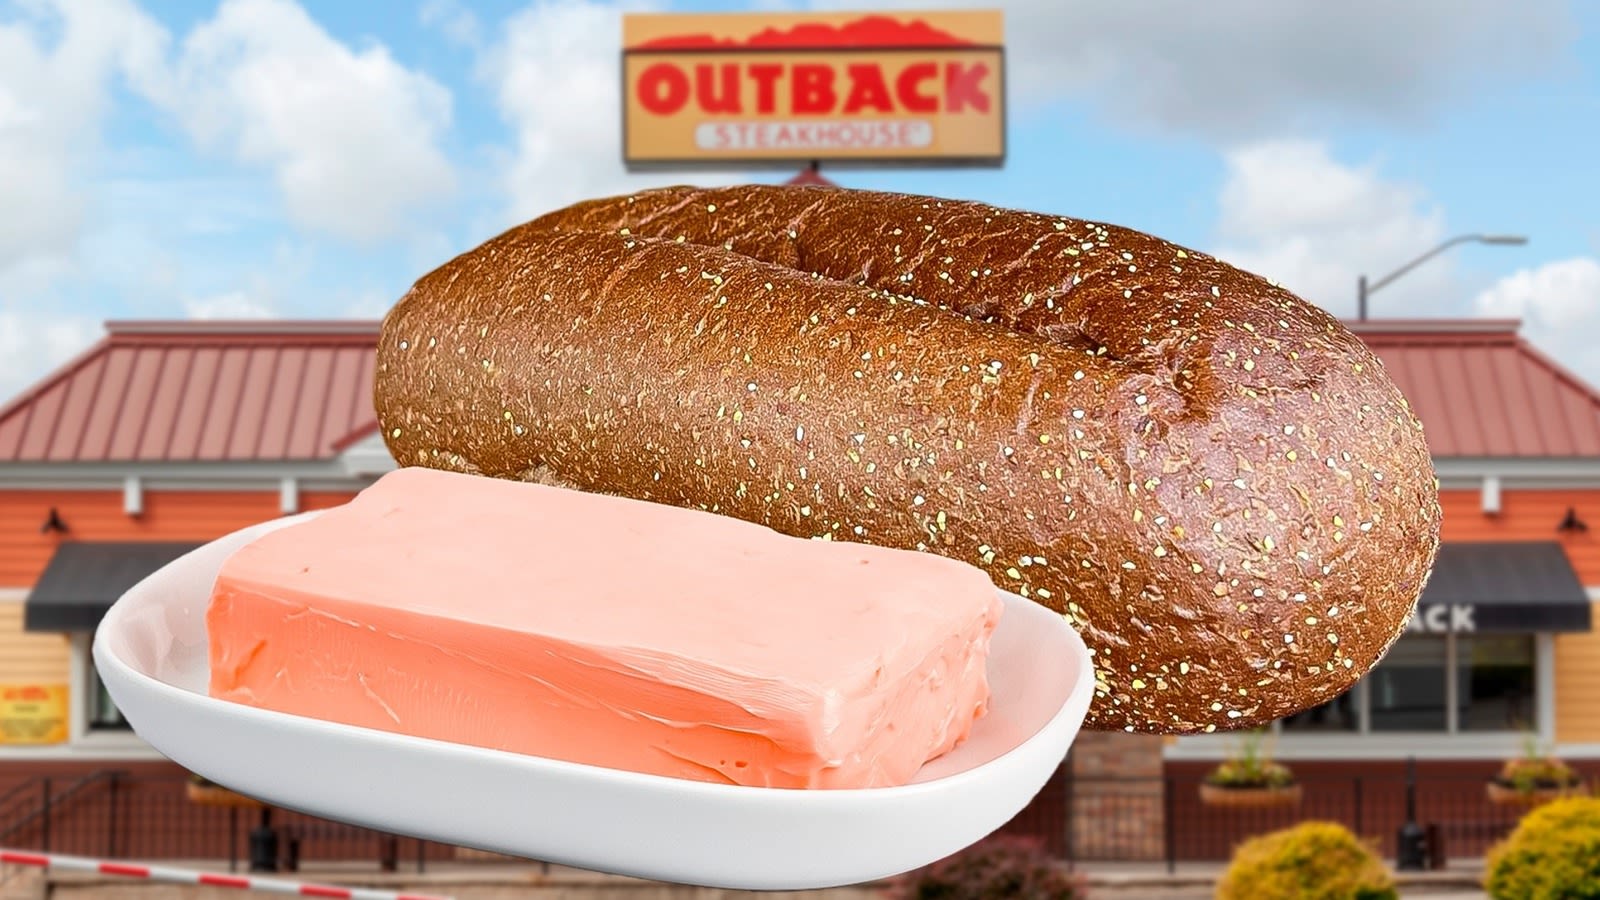 Outback Steakhouse's Raspberry Bread Is A Secret Menu Treat That's Perfectly Sweet